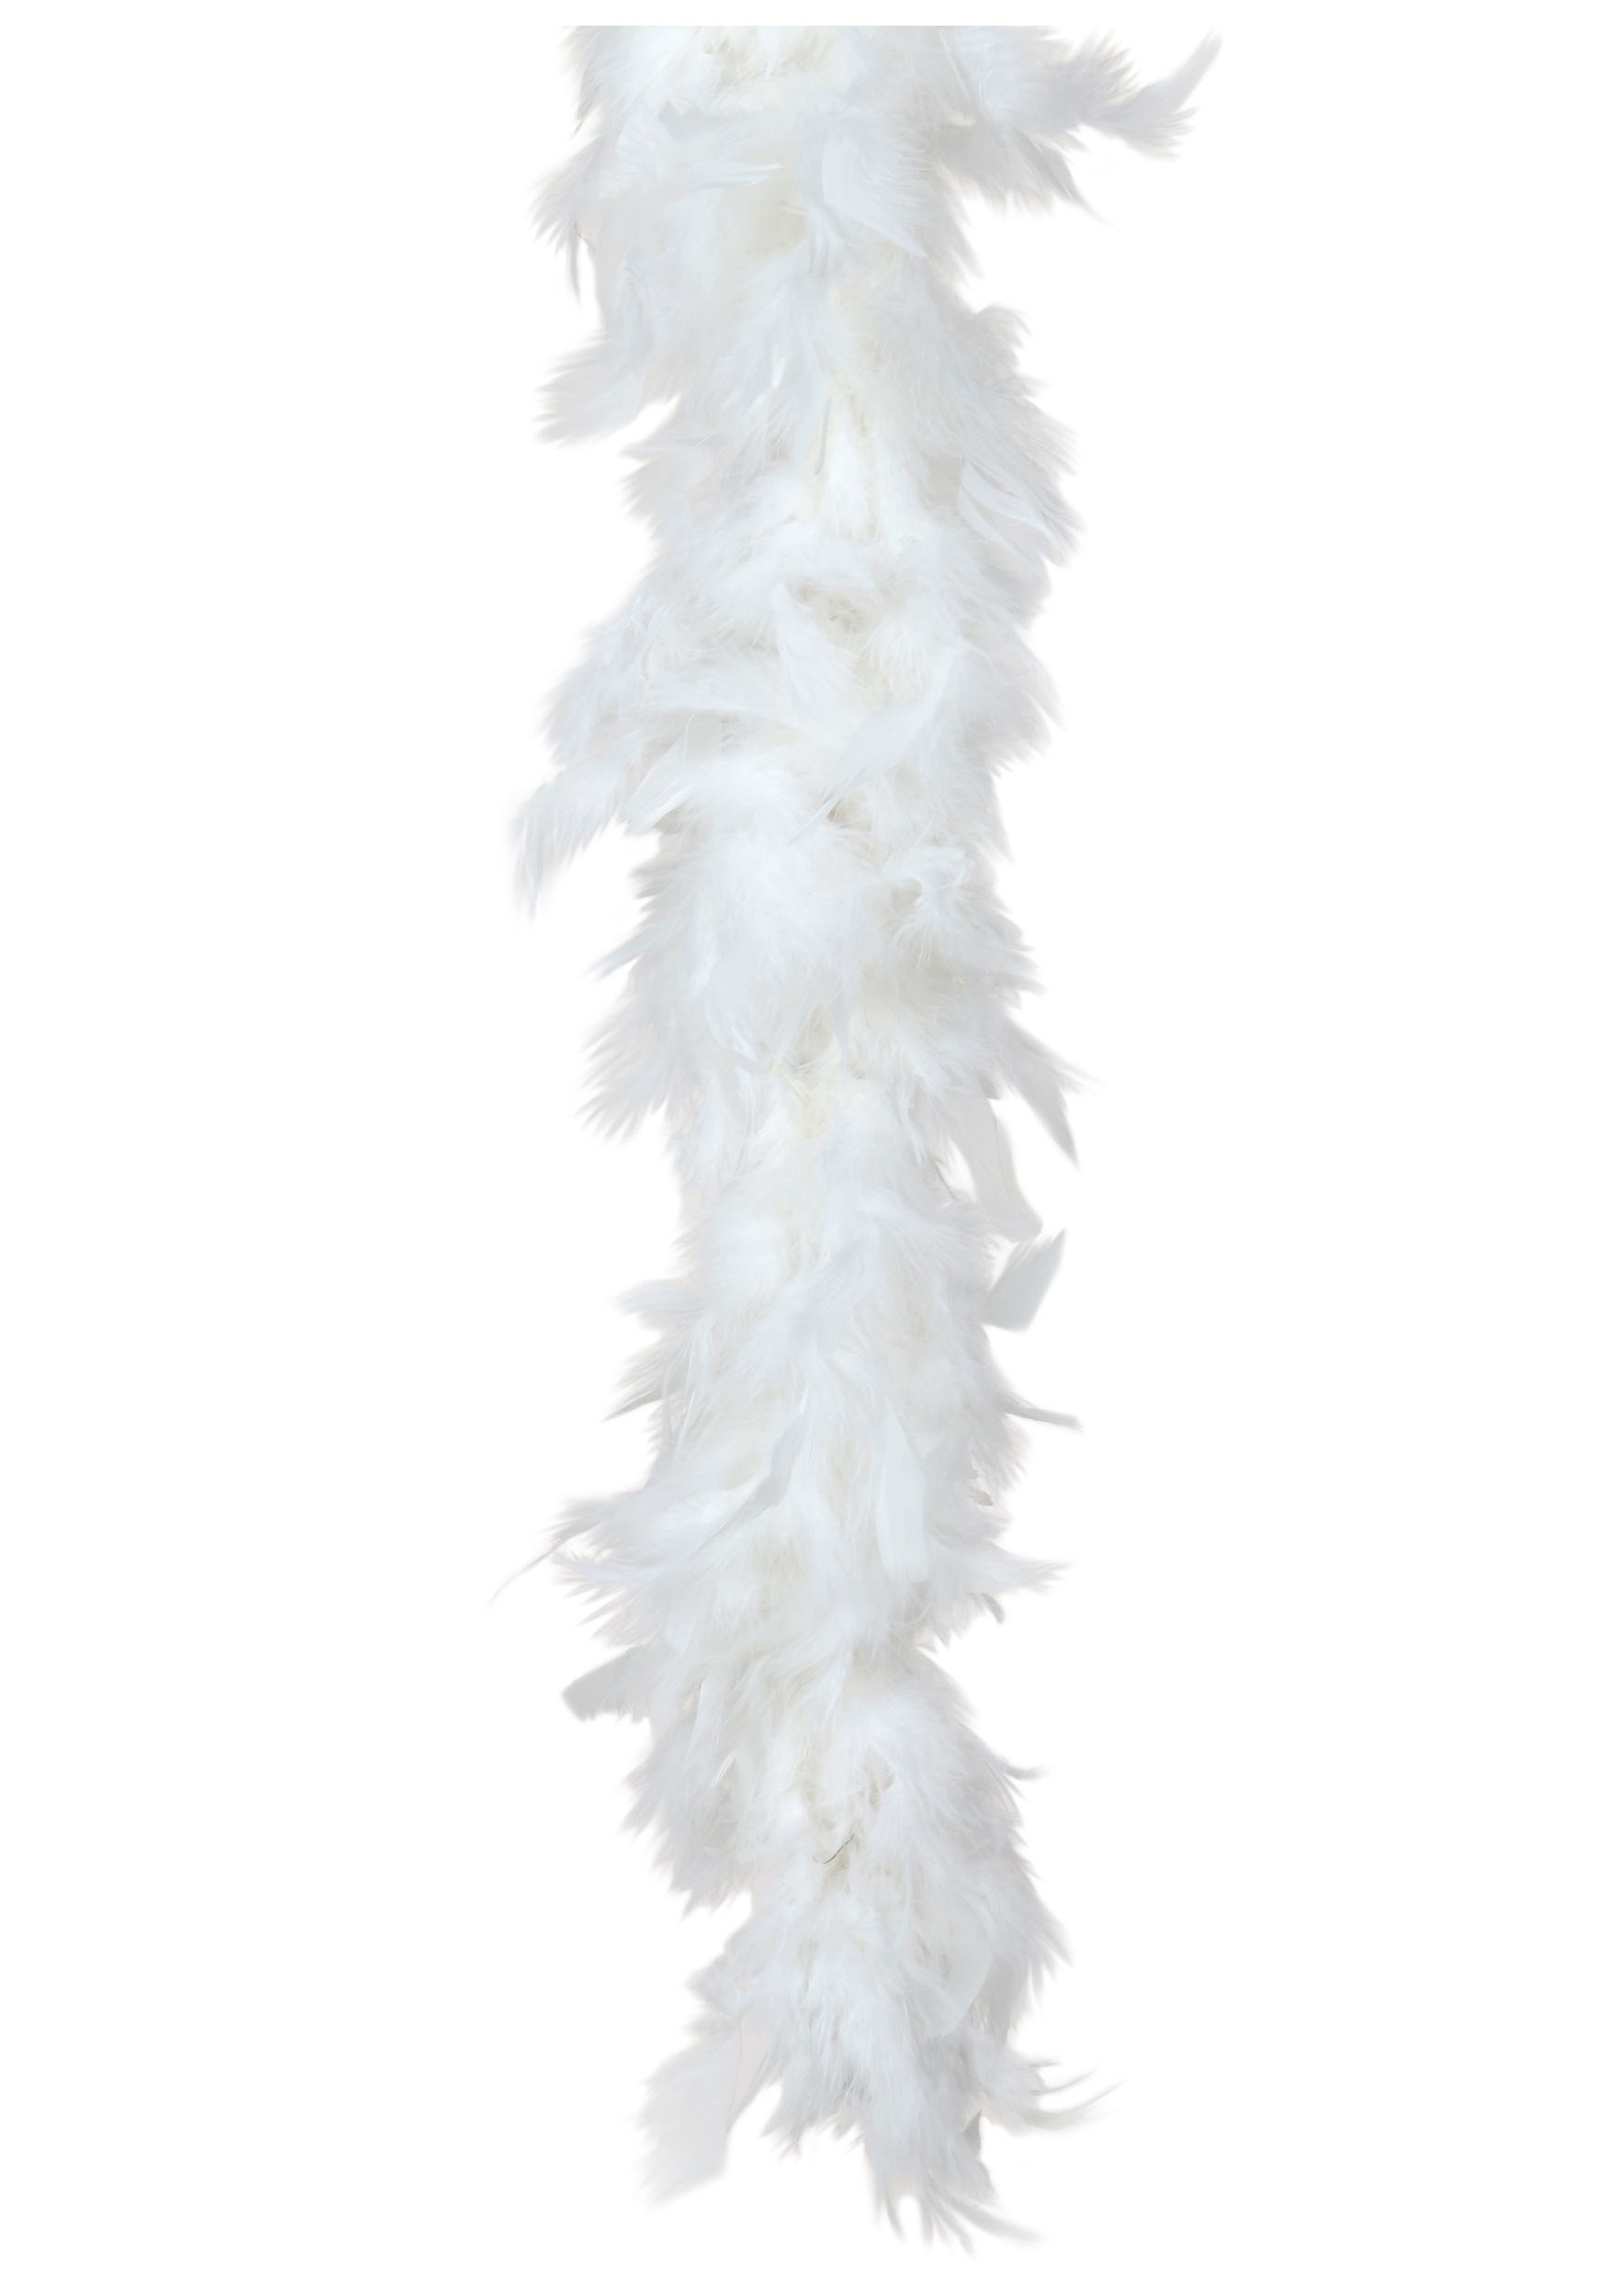 White//Silver Tinsel, 80g Fukang Feather Turkey Chandelle Feather Boa 72 80 Gram